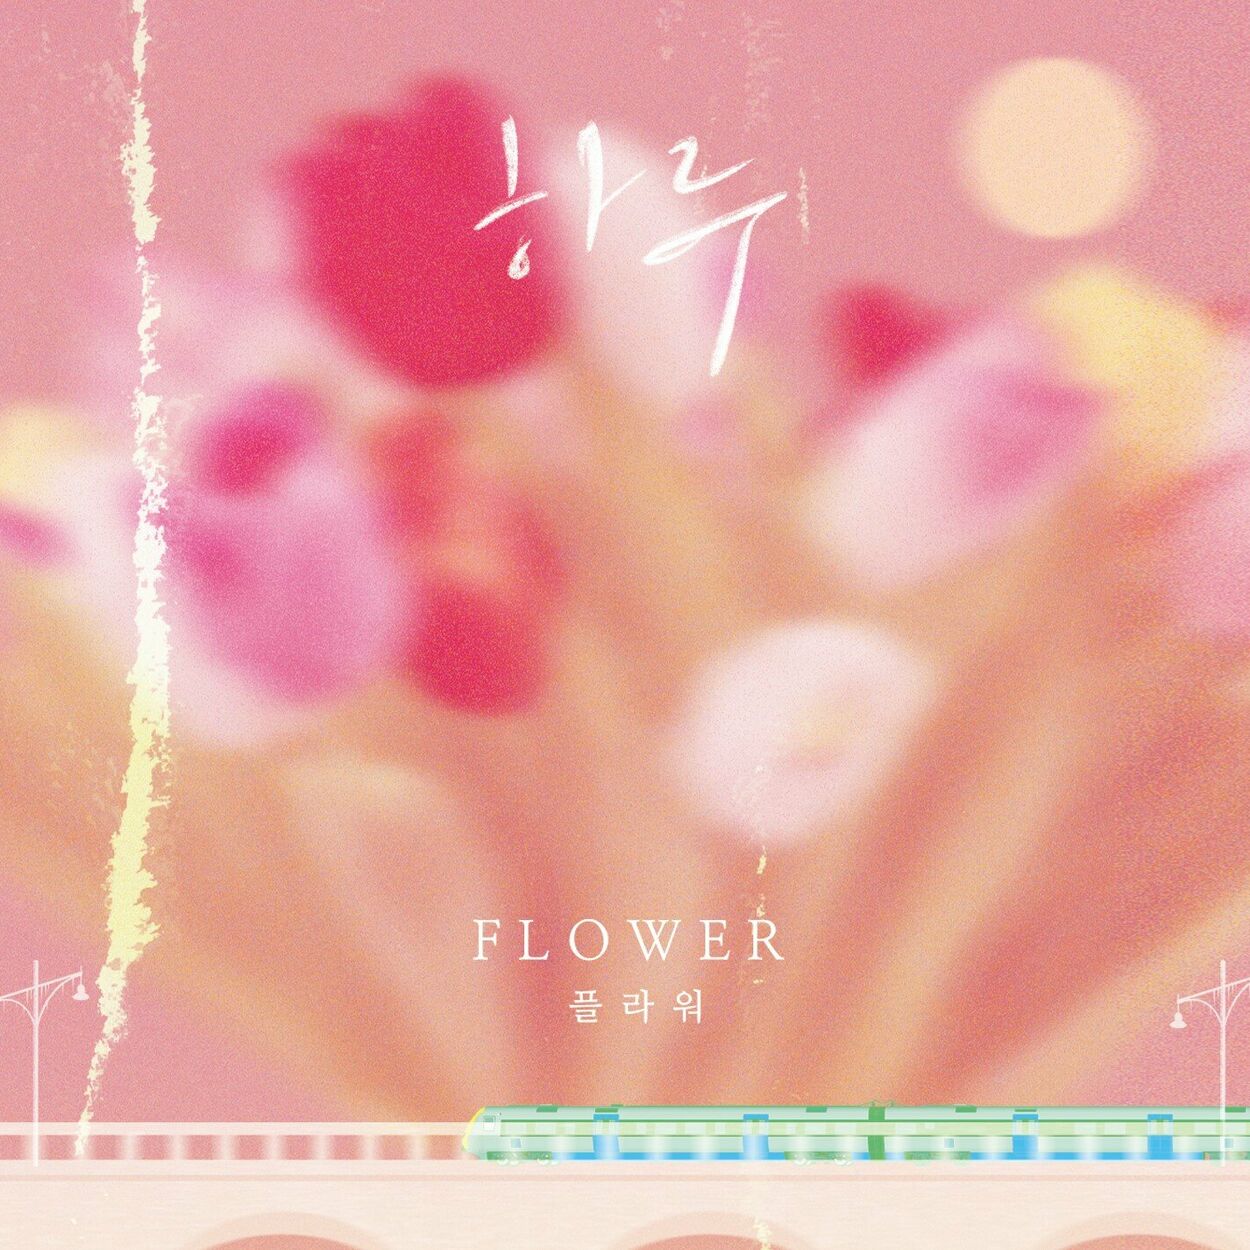 Flower – One day – Single